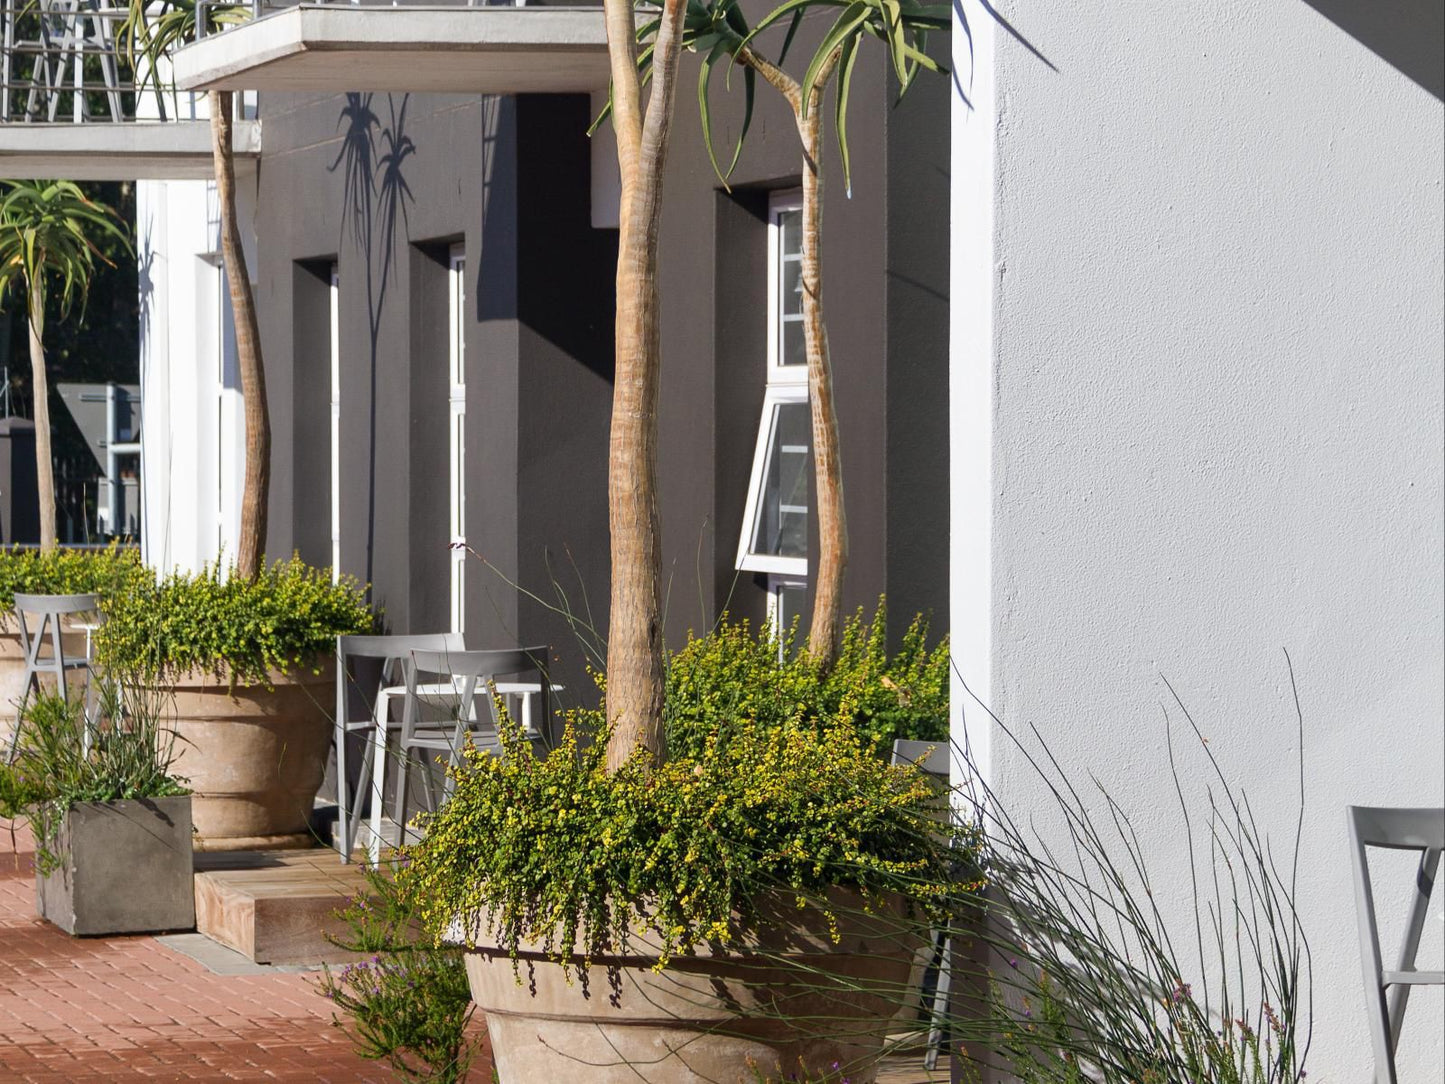 Quiver Tree Self Catering Apartments Stellenbosch Western Cape South Africa House, Building, Architecture